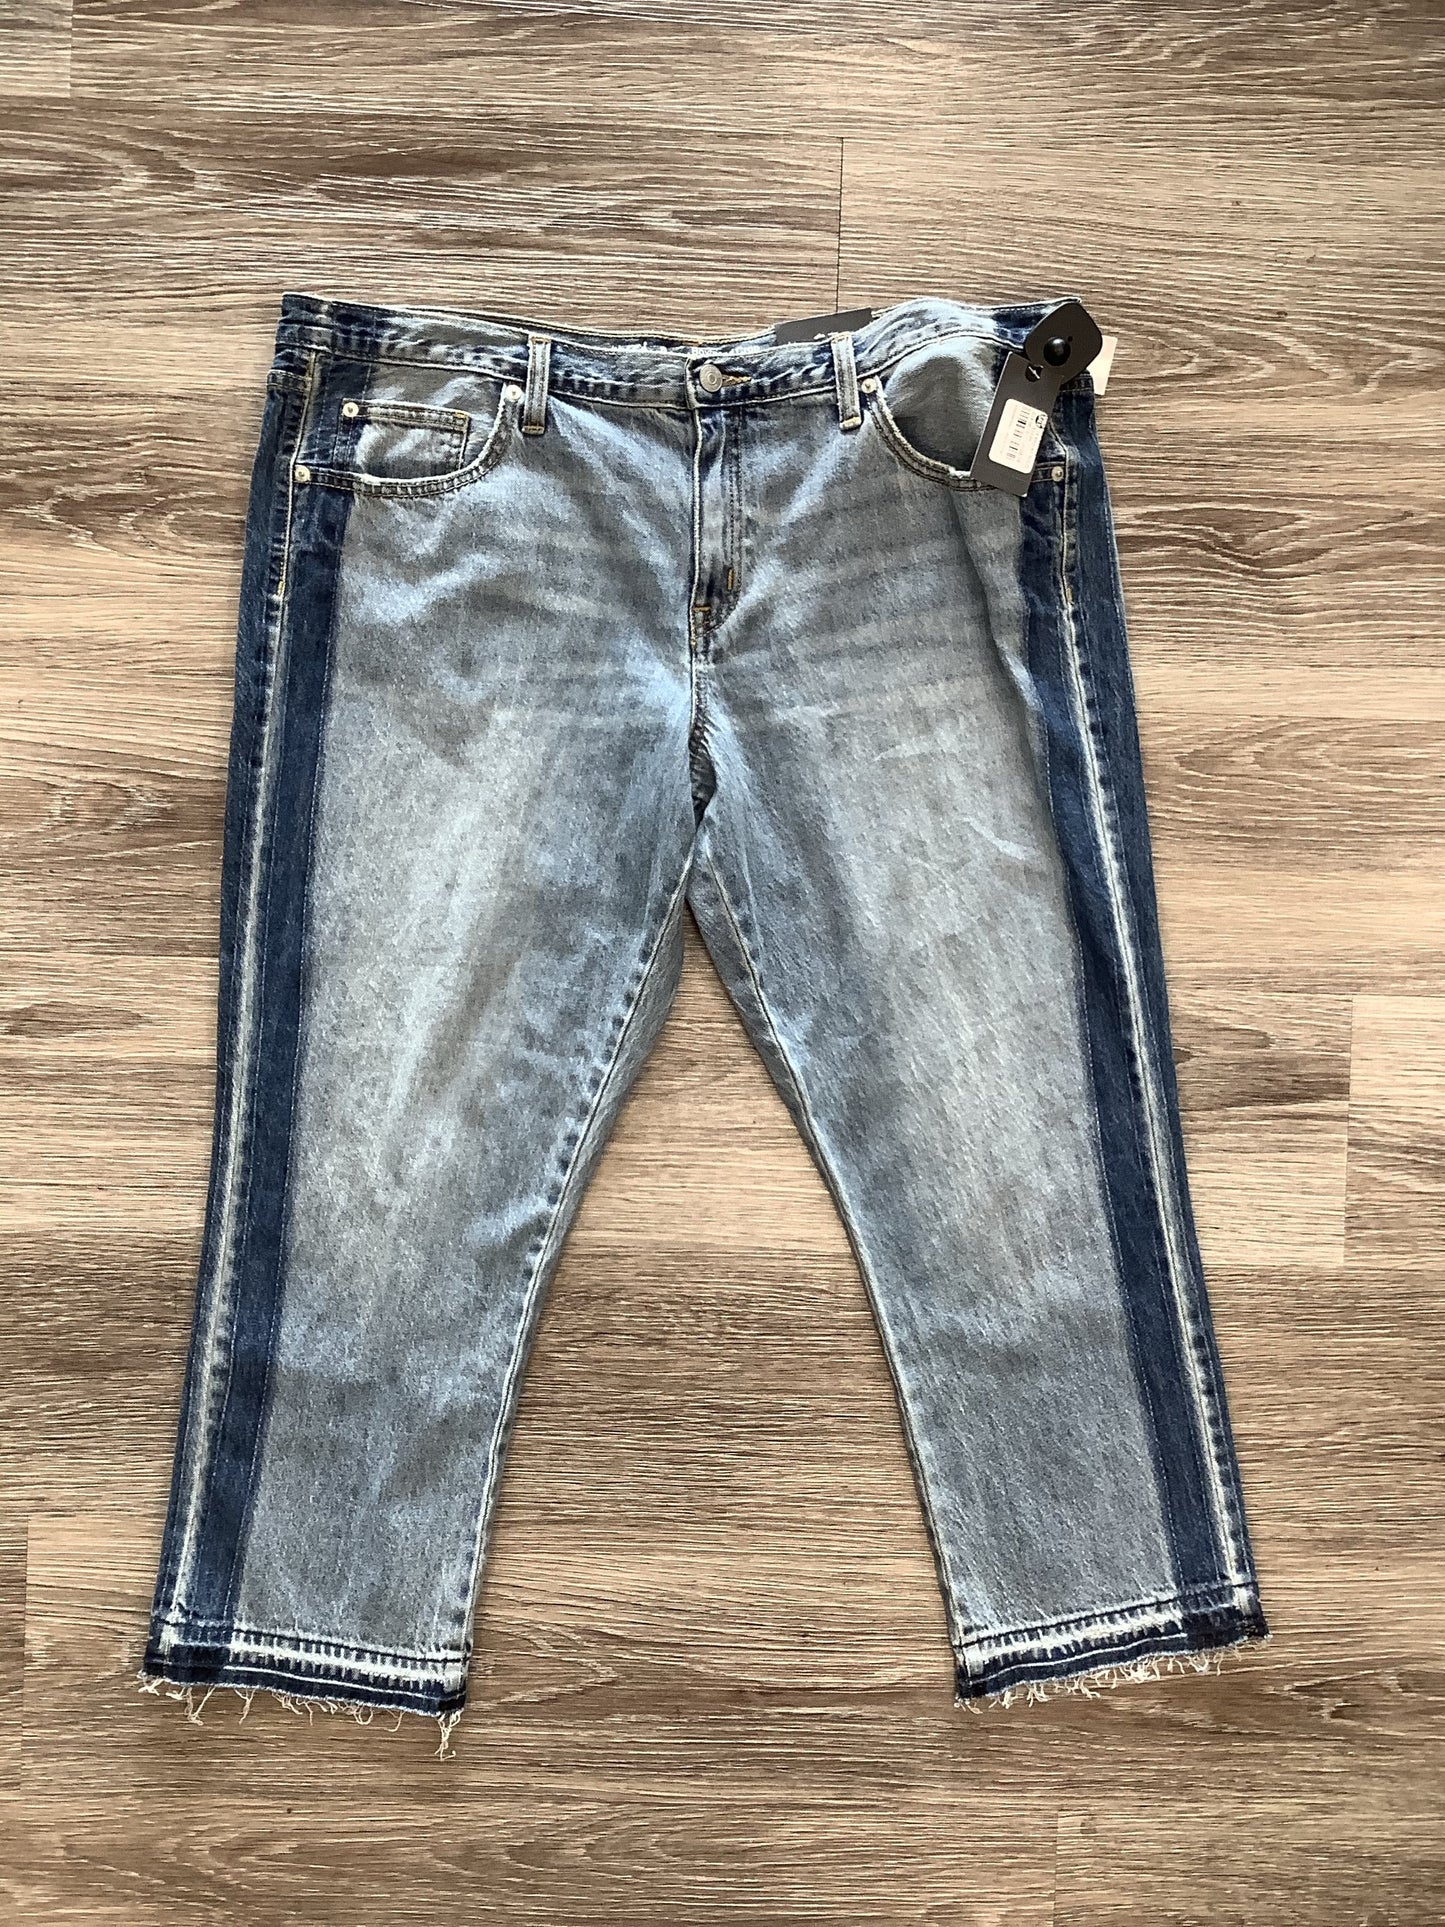 JEANS SIZE 18 BY MOSSIMO